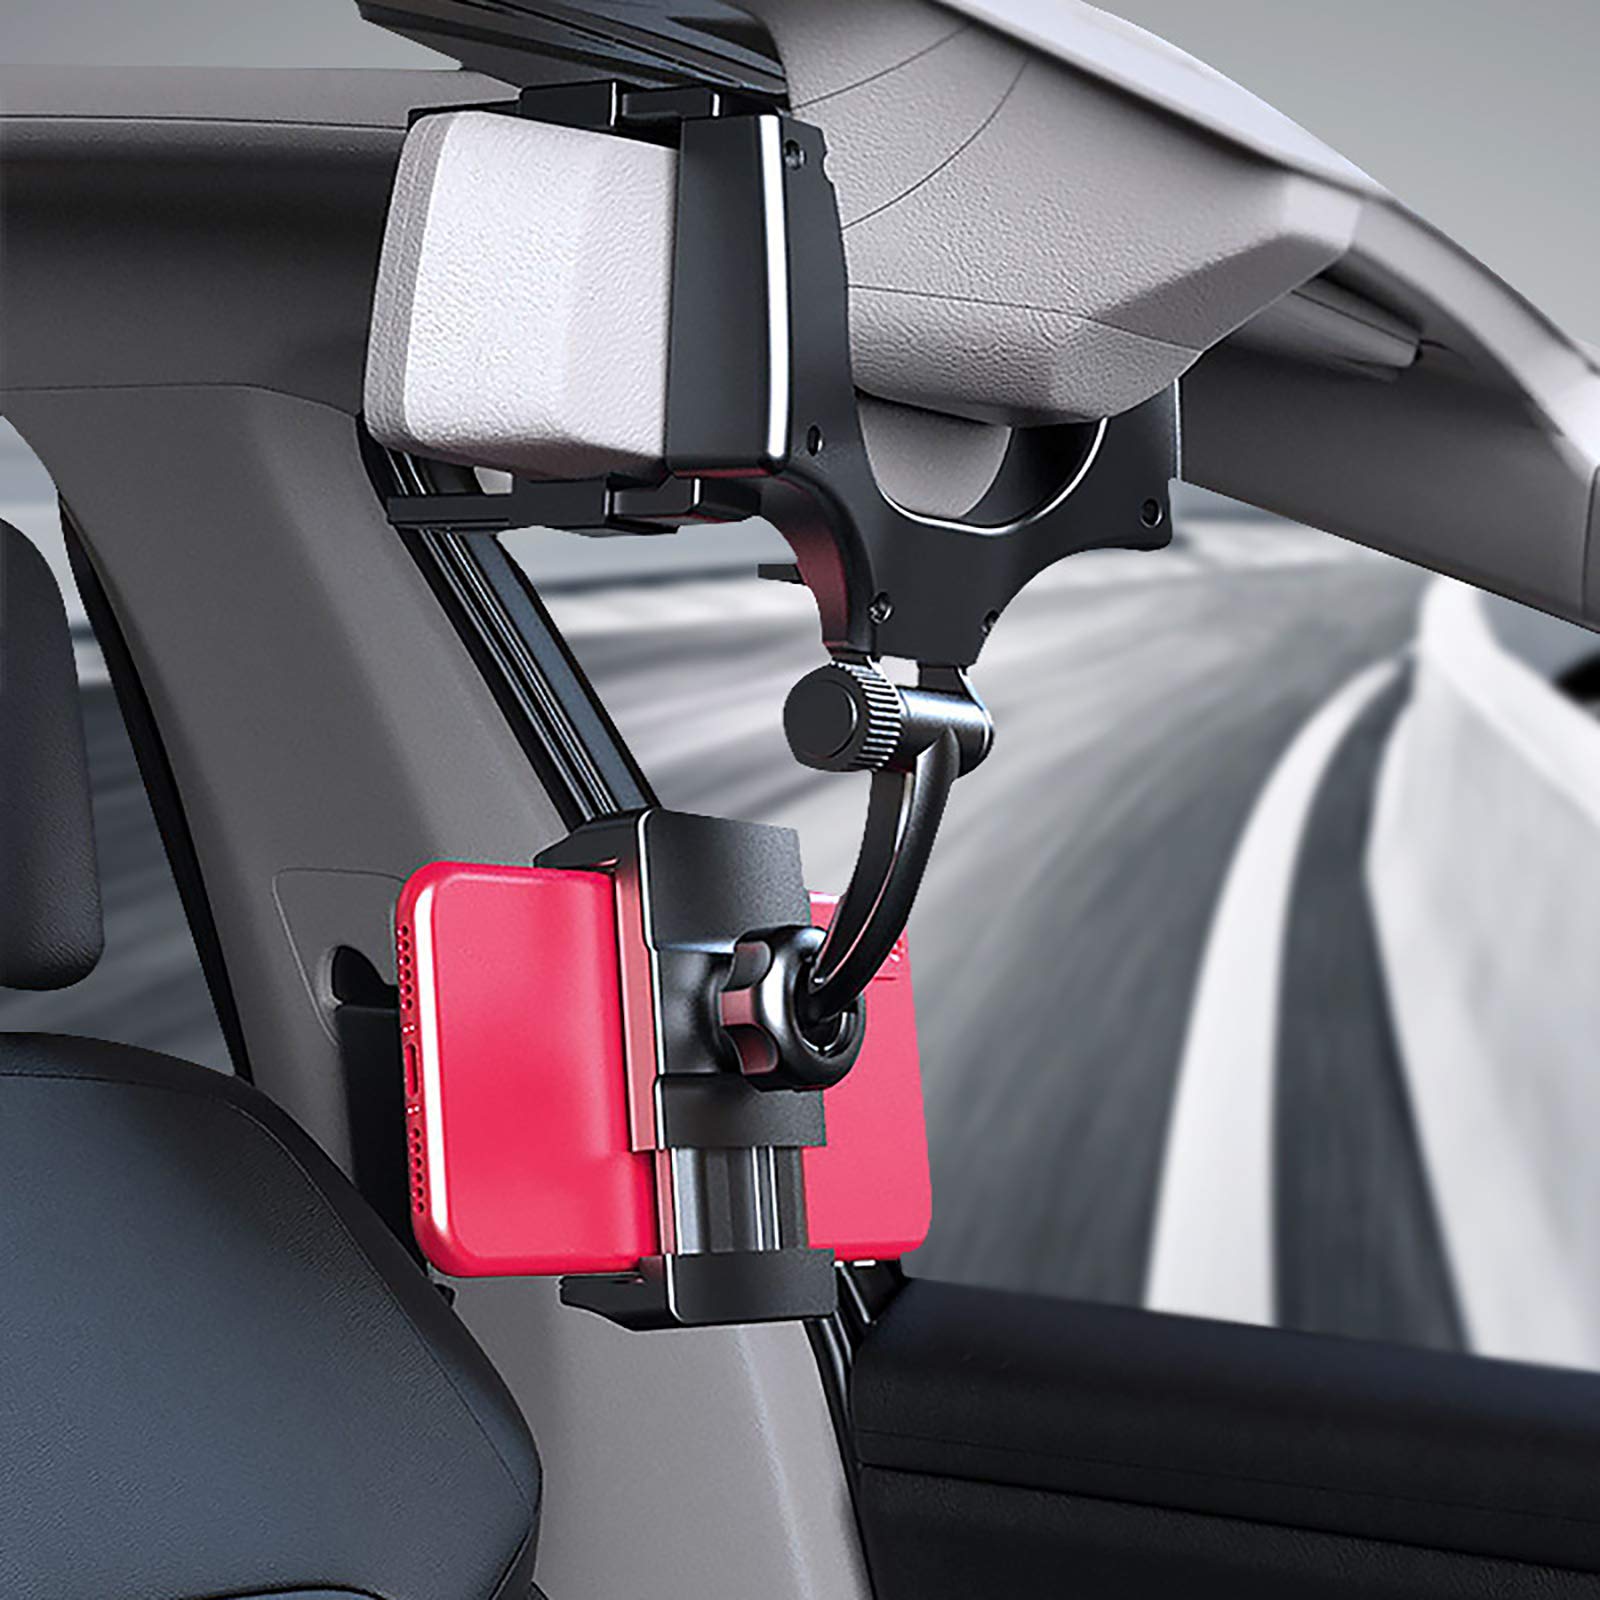 Phone Mount for Car